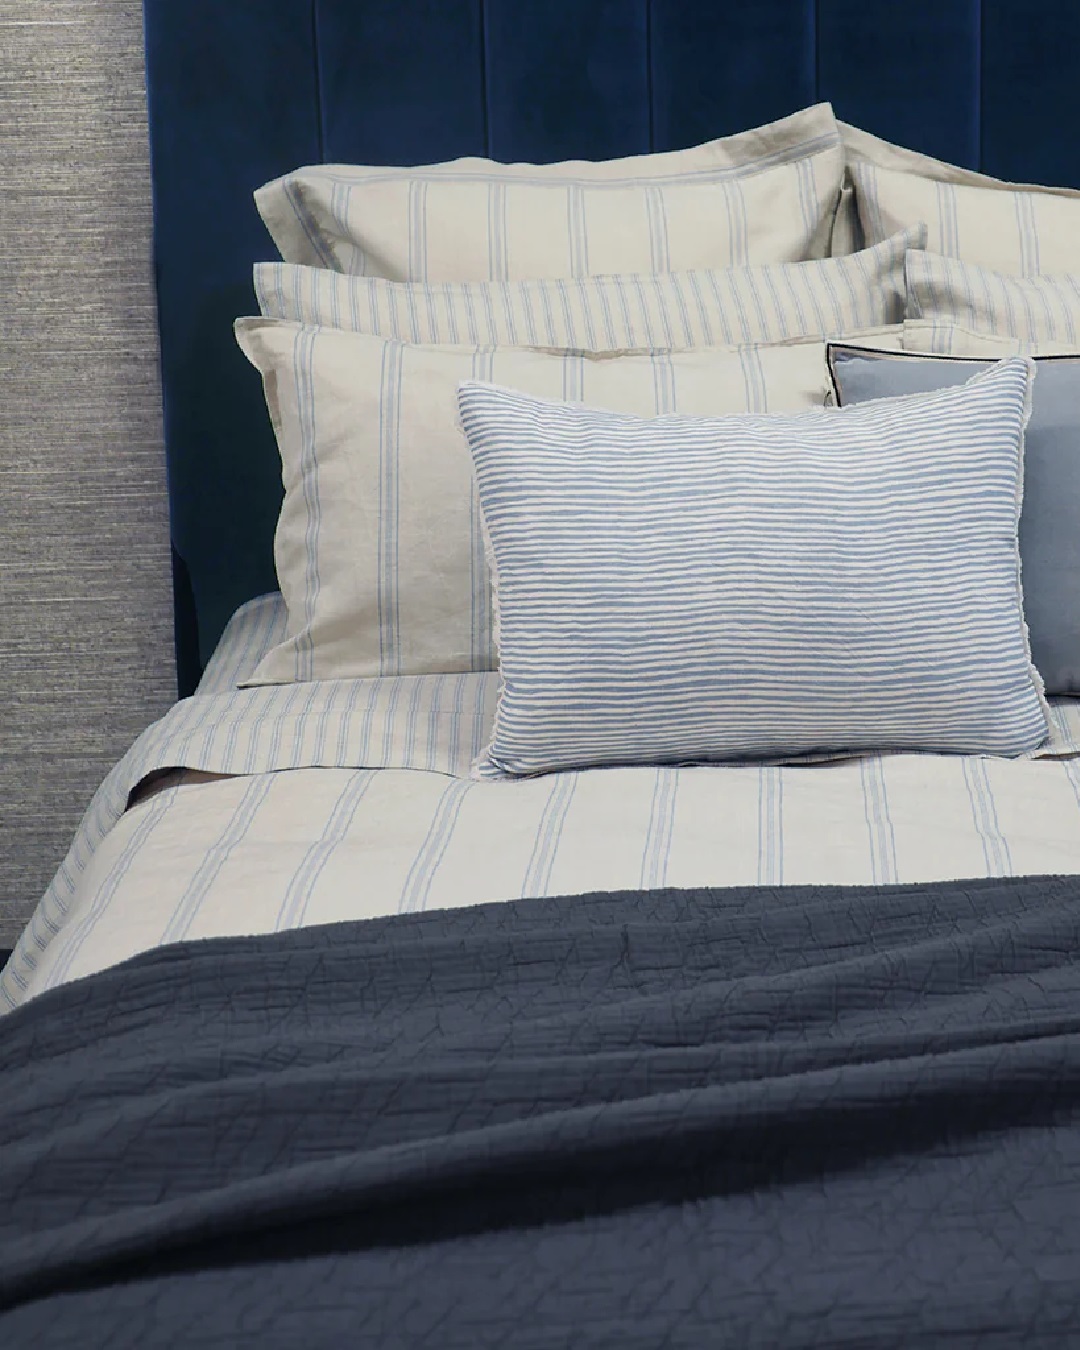 Striped blue and white sheets and duvet on bed with pillows